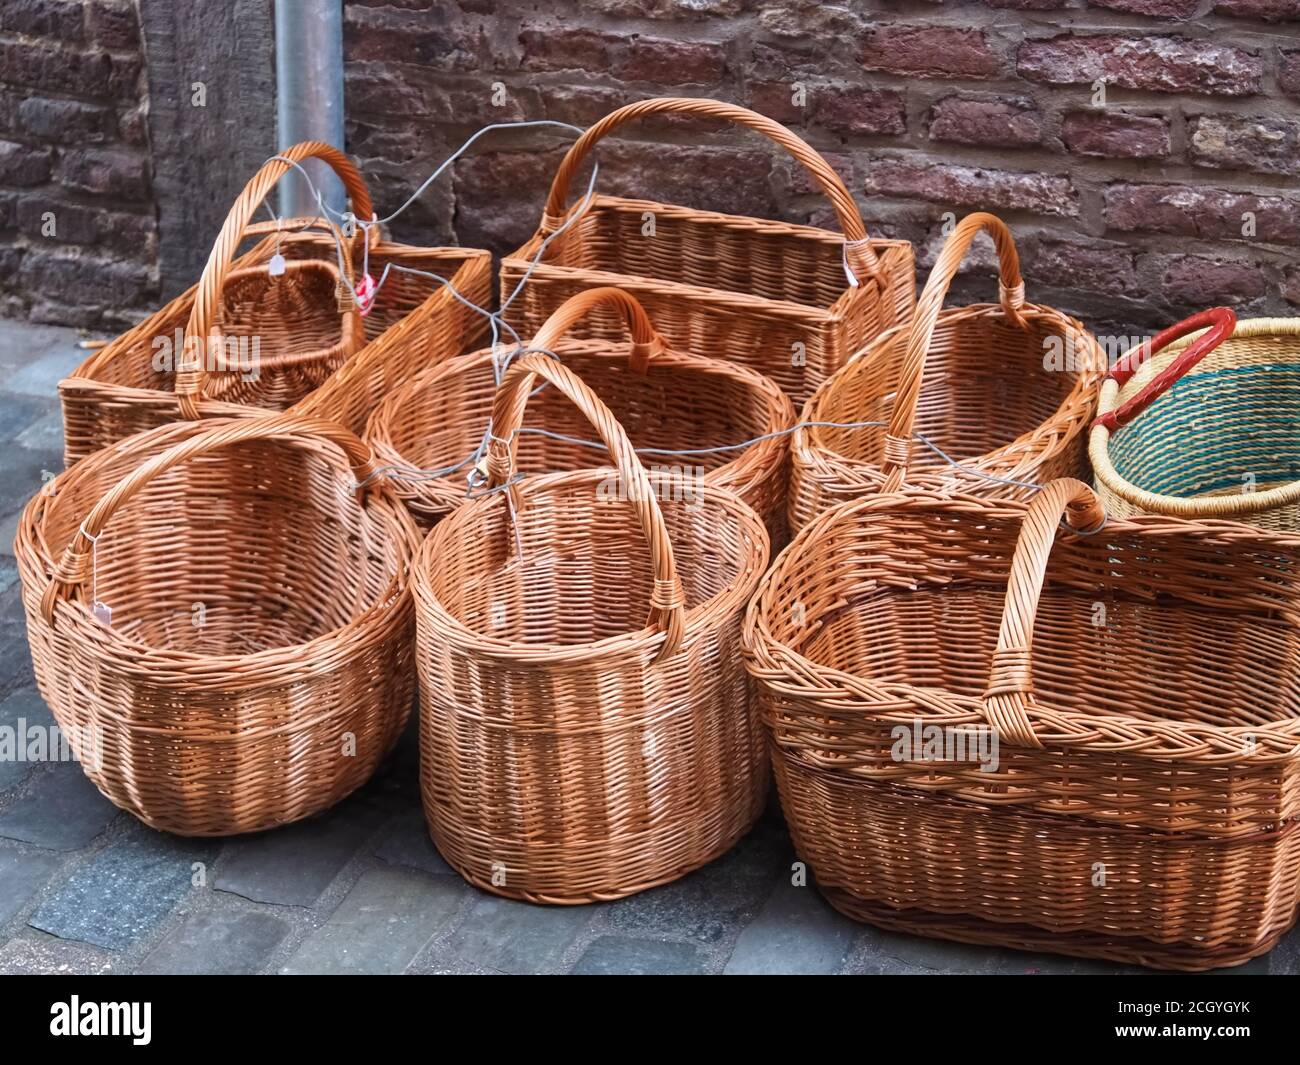 Wicker Shopping Basket Market High Resolution Stock Photography and Images  - Alamy